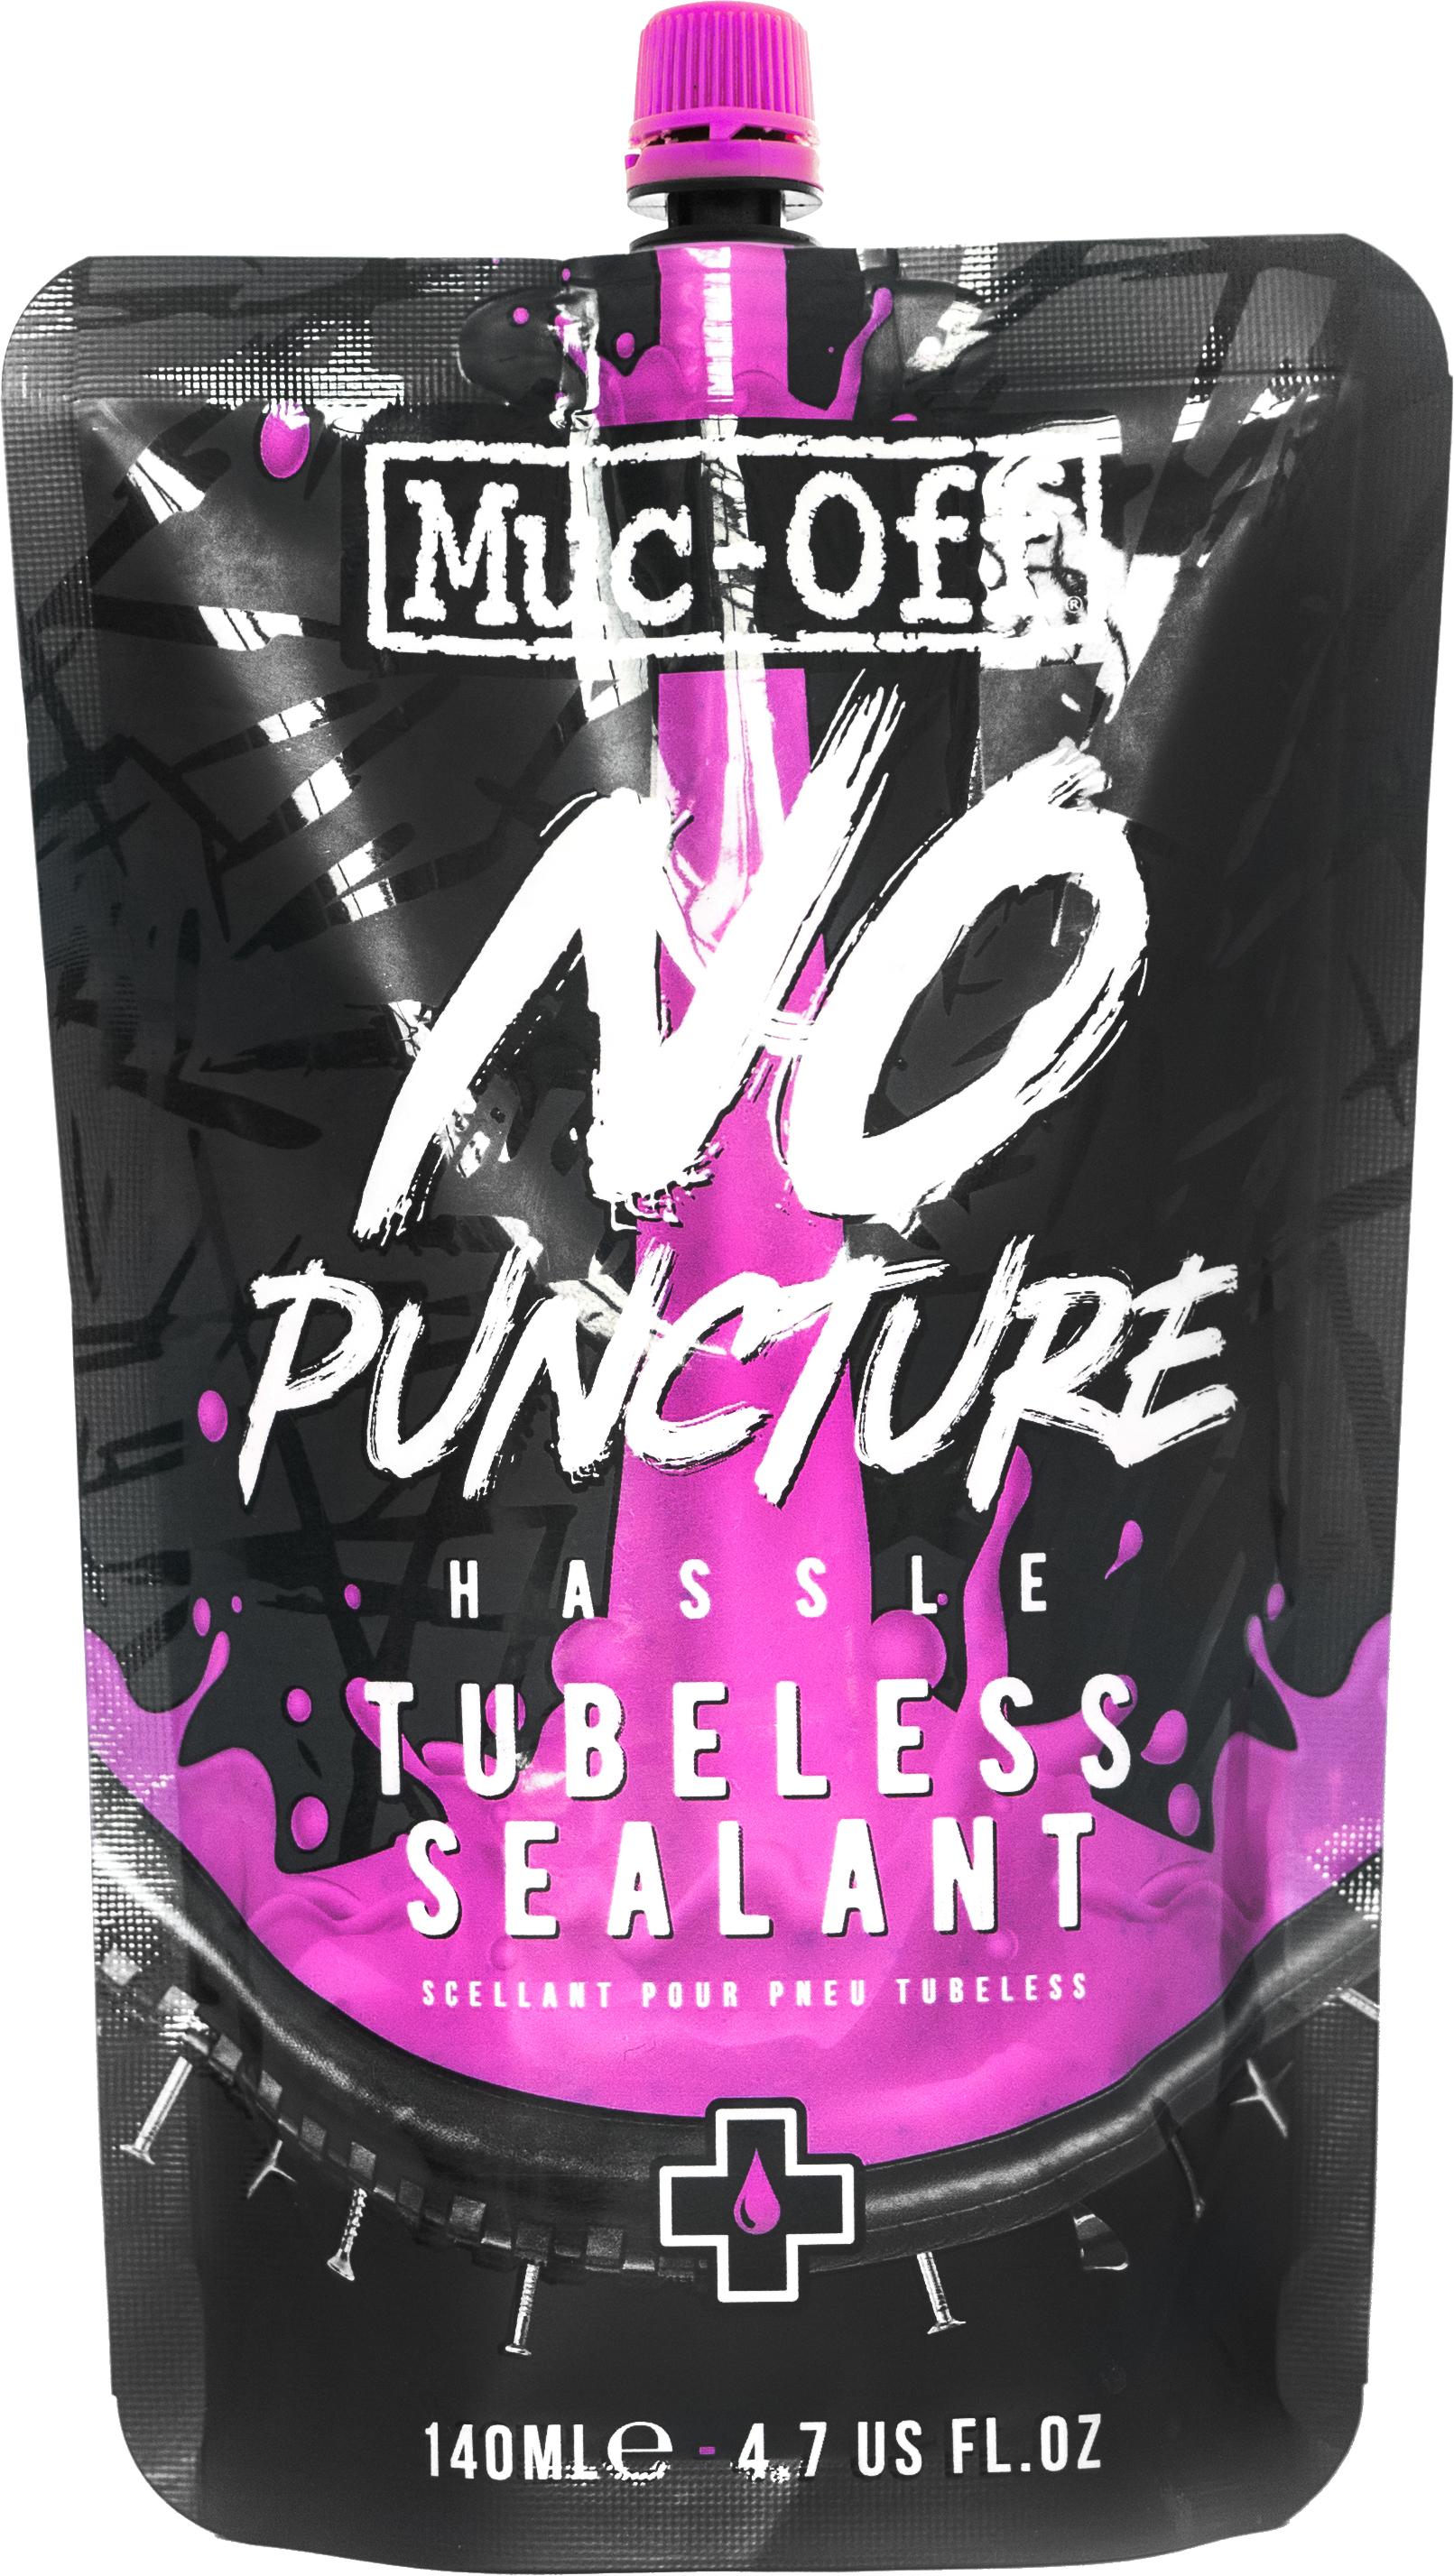 Muc-off No Puncture Hassle 140ml Pouch - Black